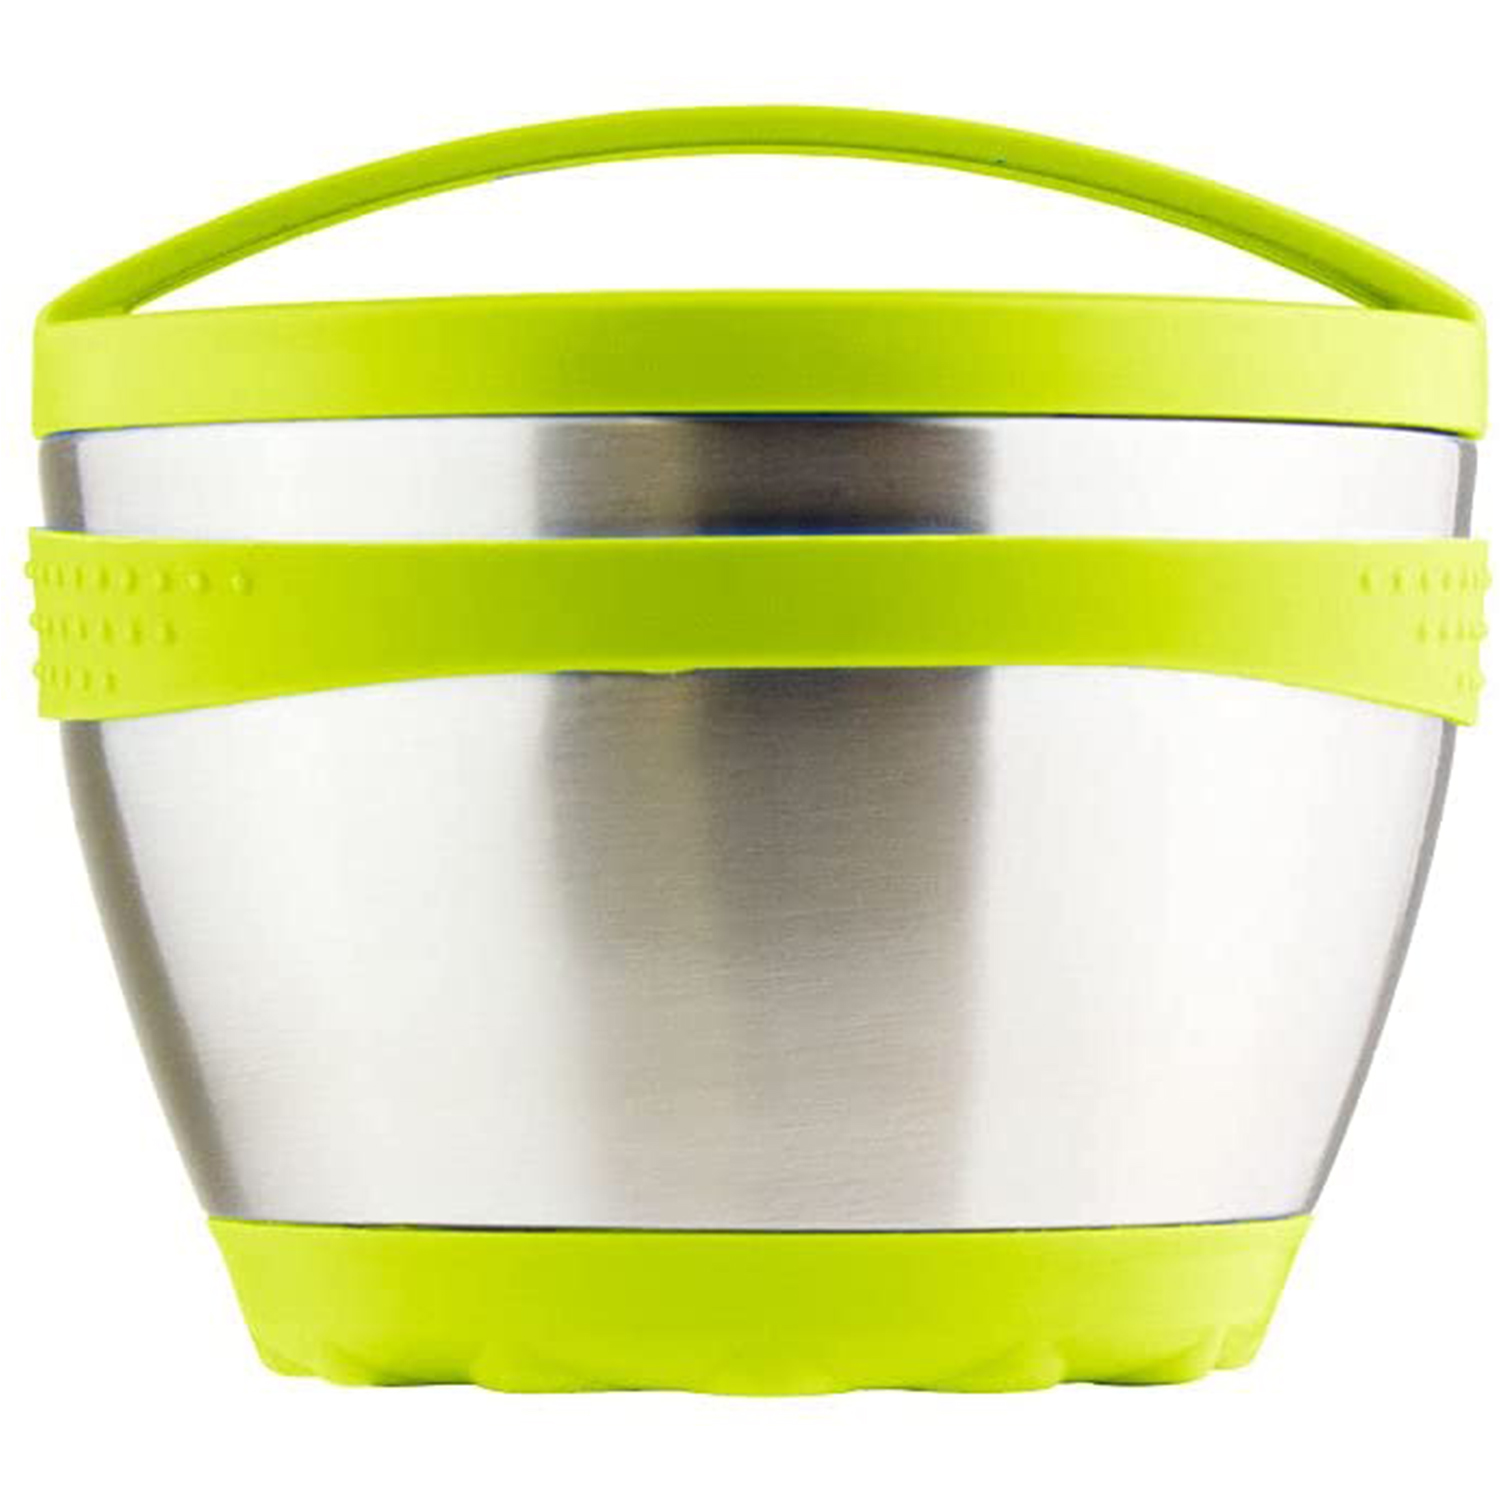 Kid Basix Safe Bowl, Reusable Stainless Steel Thermos Container for Hot &  Cold Food Storage, Dishwasher Safe, Lime, One 16 Ounce Bowl